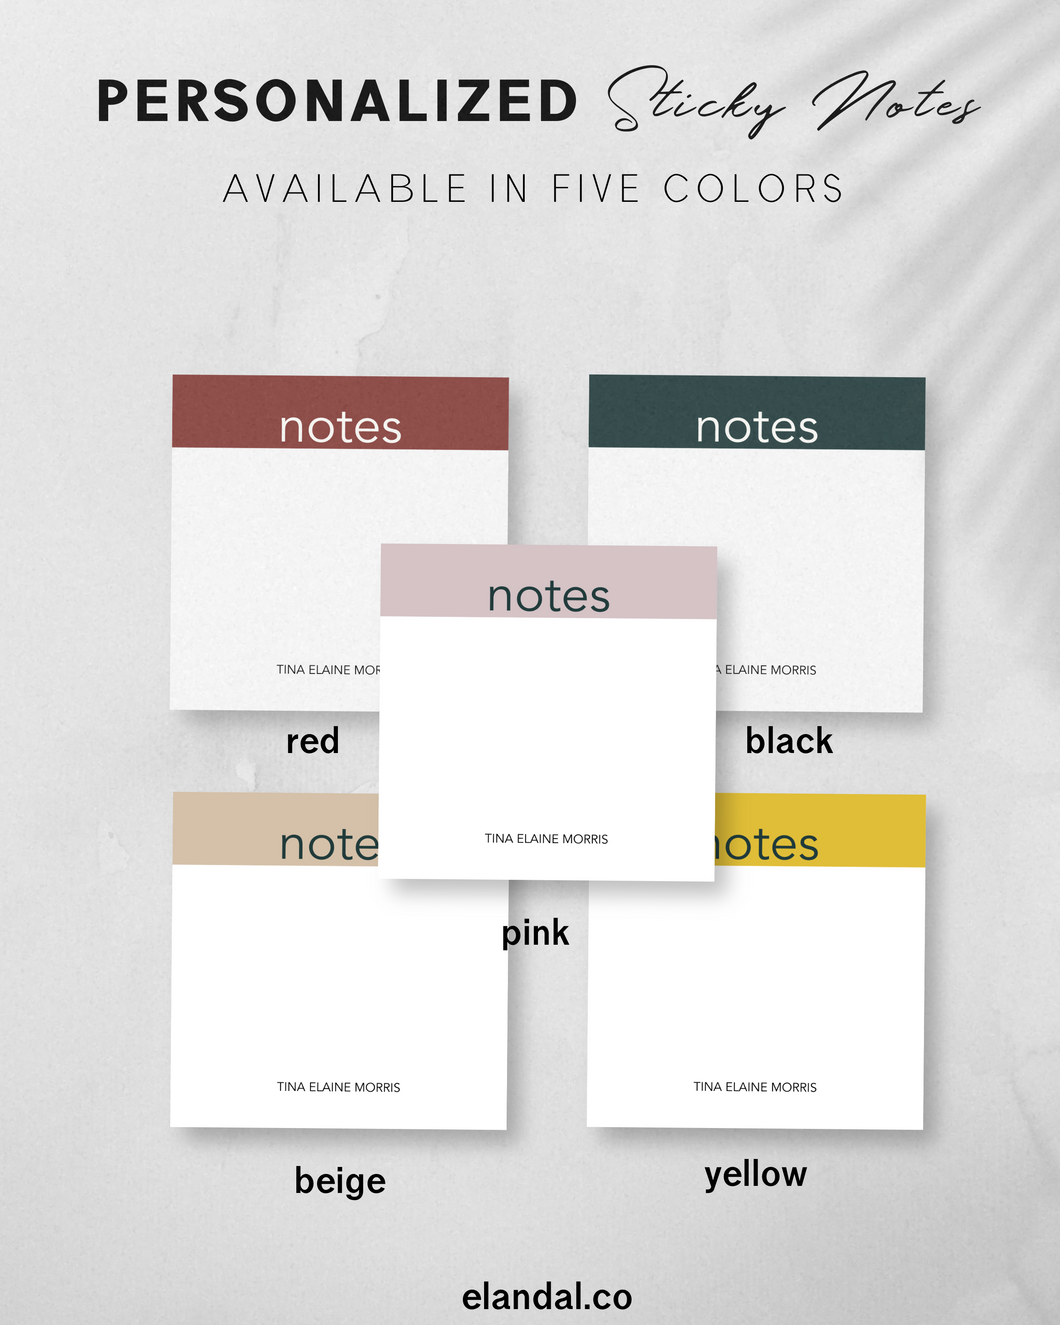 Personalized Sticky Notes/ 3x3 in. Adhesive Notepads Assorted Colors